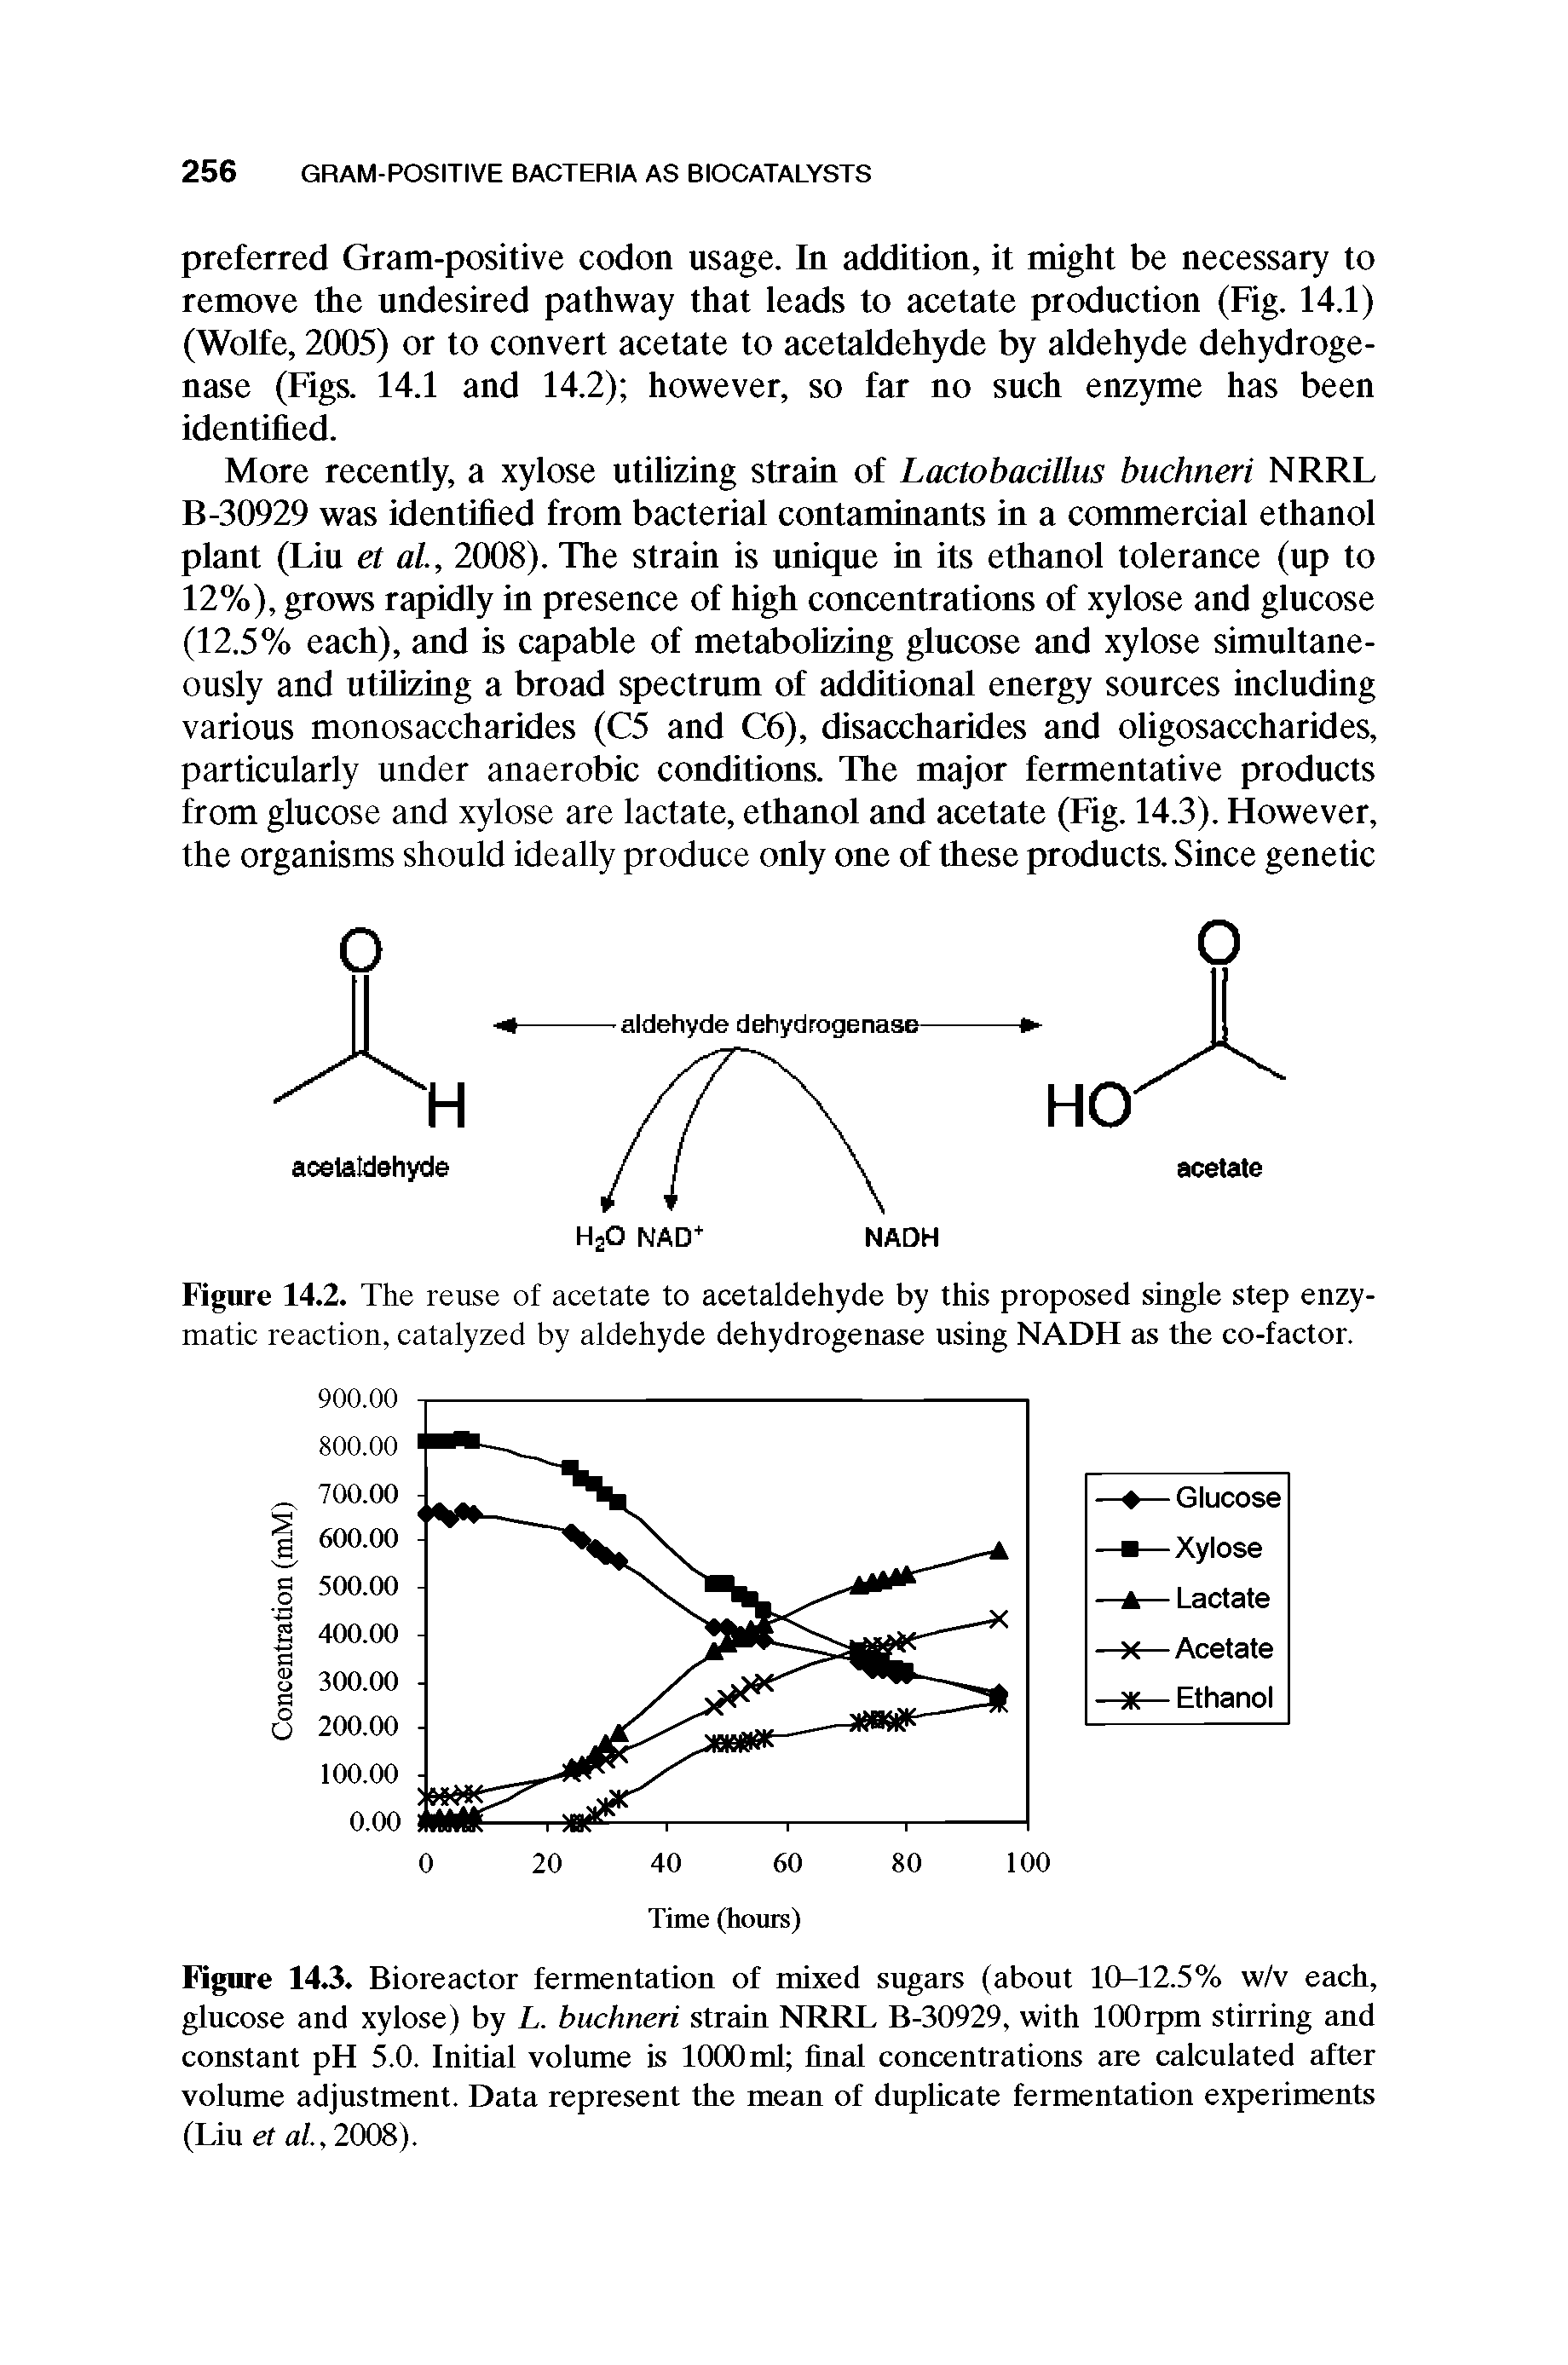 Figure 14.2. The reuse of acetate to acetaldehyde by this proposed single step enzymatic reaction, catalyzed by aldehyde dehydrogenase using NADH as the co-factor.